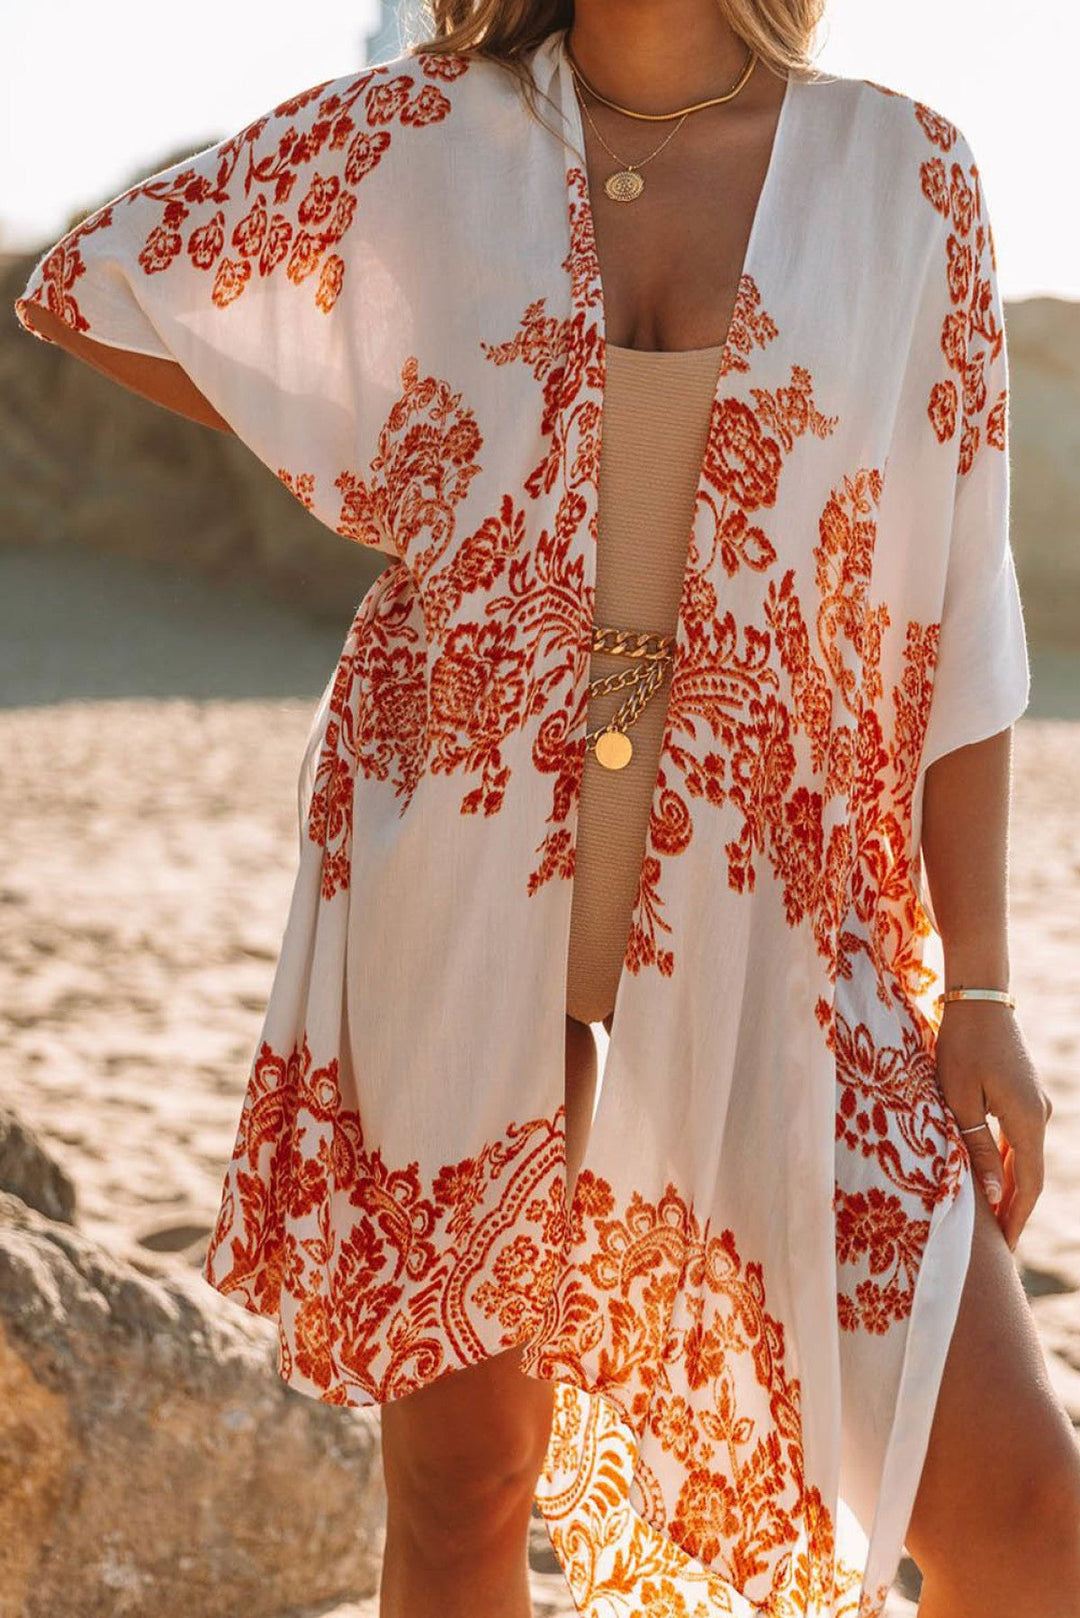 Floral Mid-Length Side Slits Chiffon Cover Up